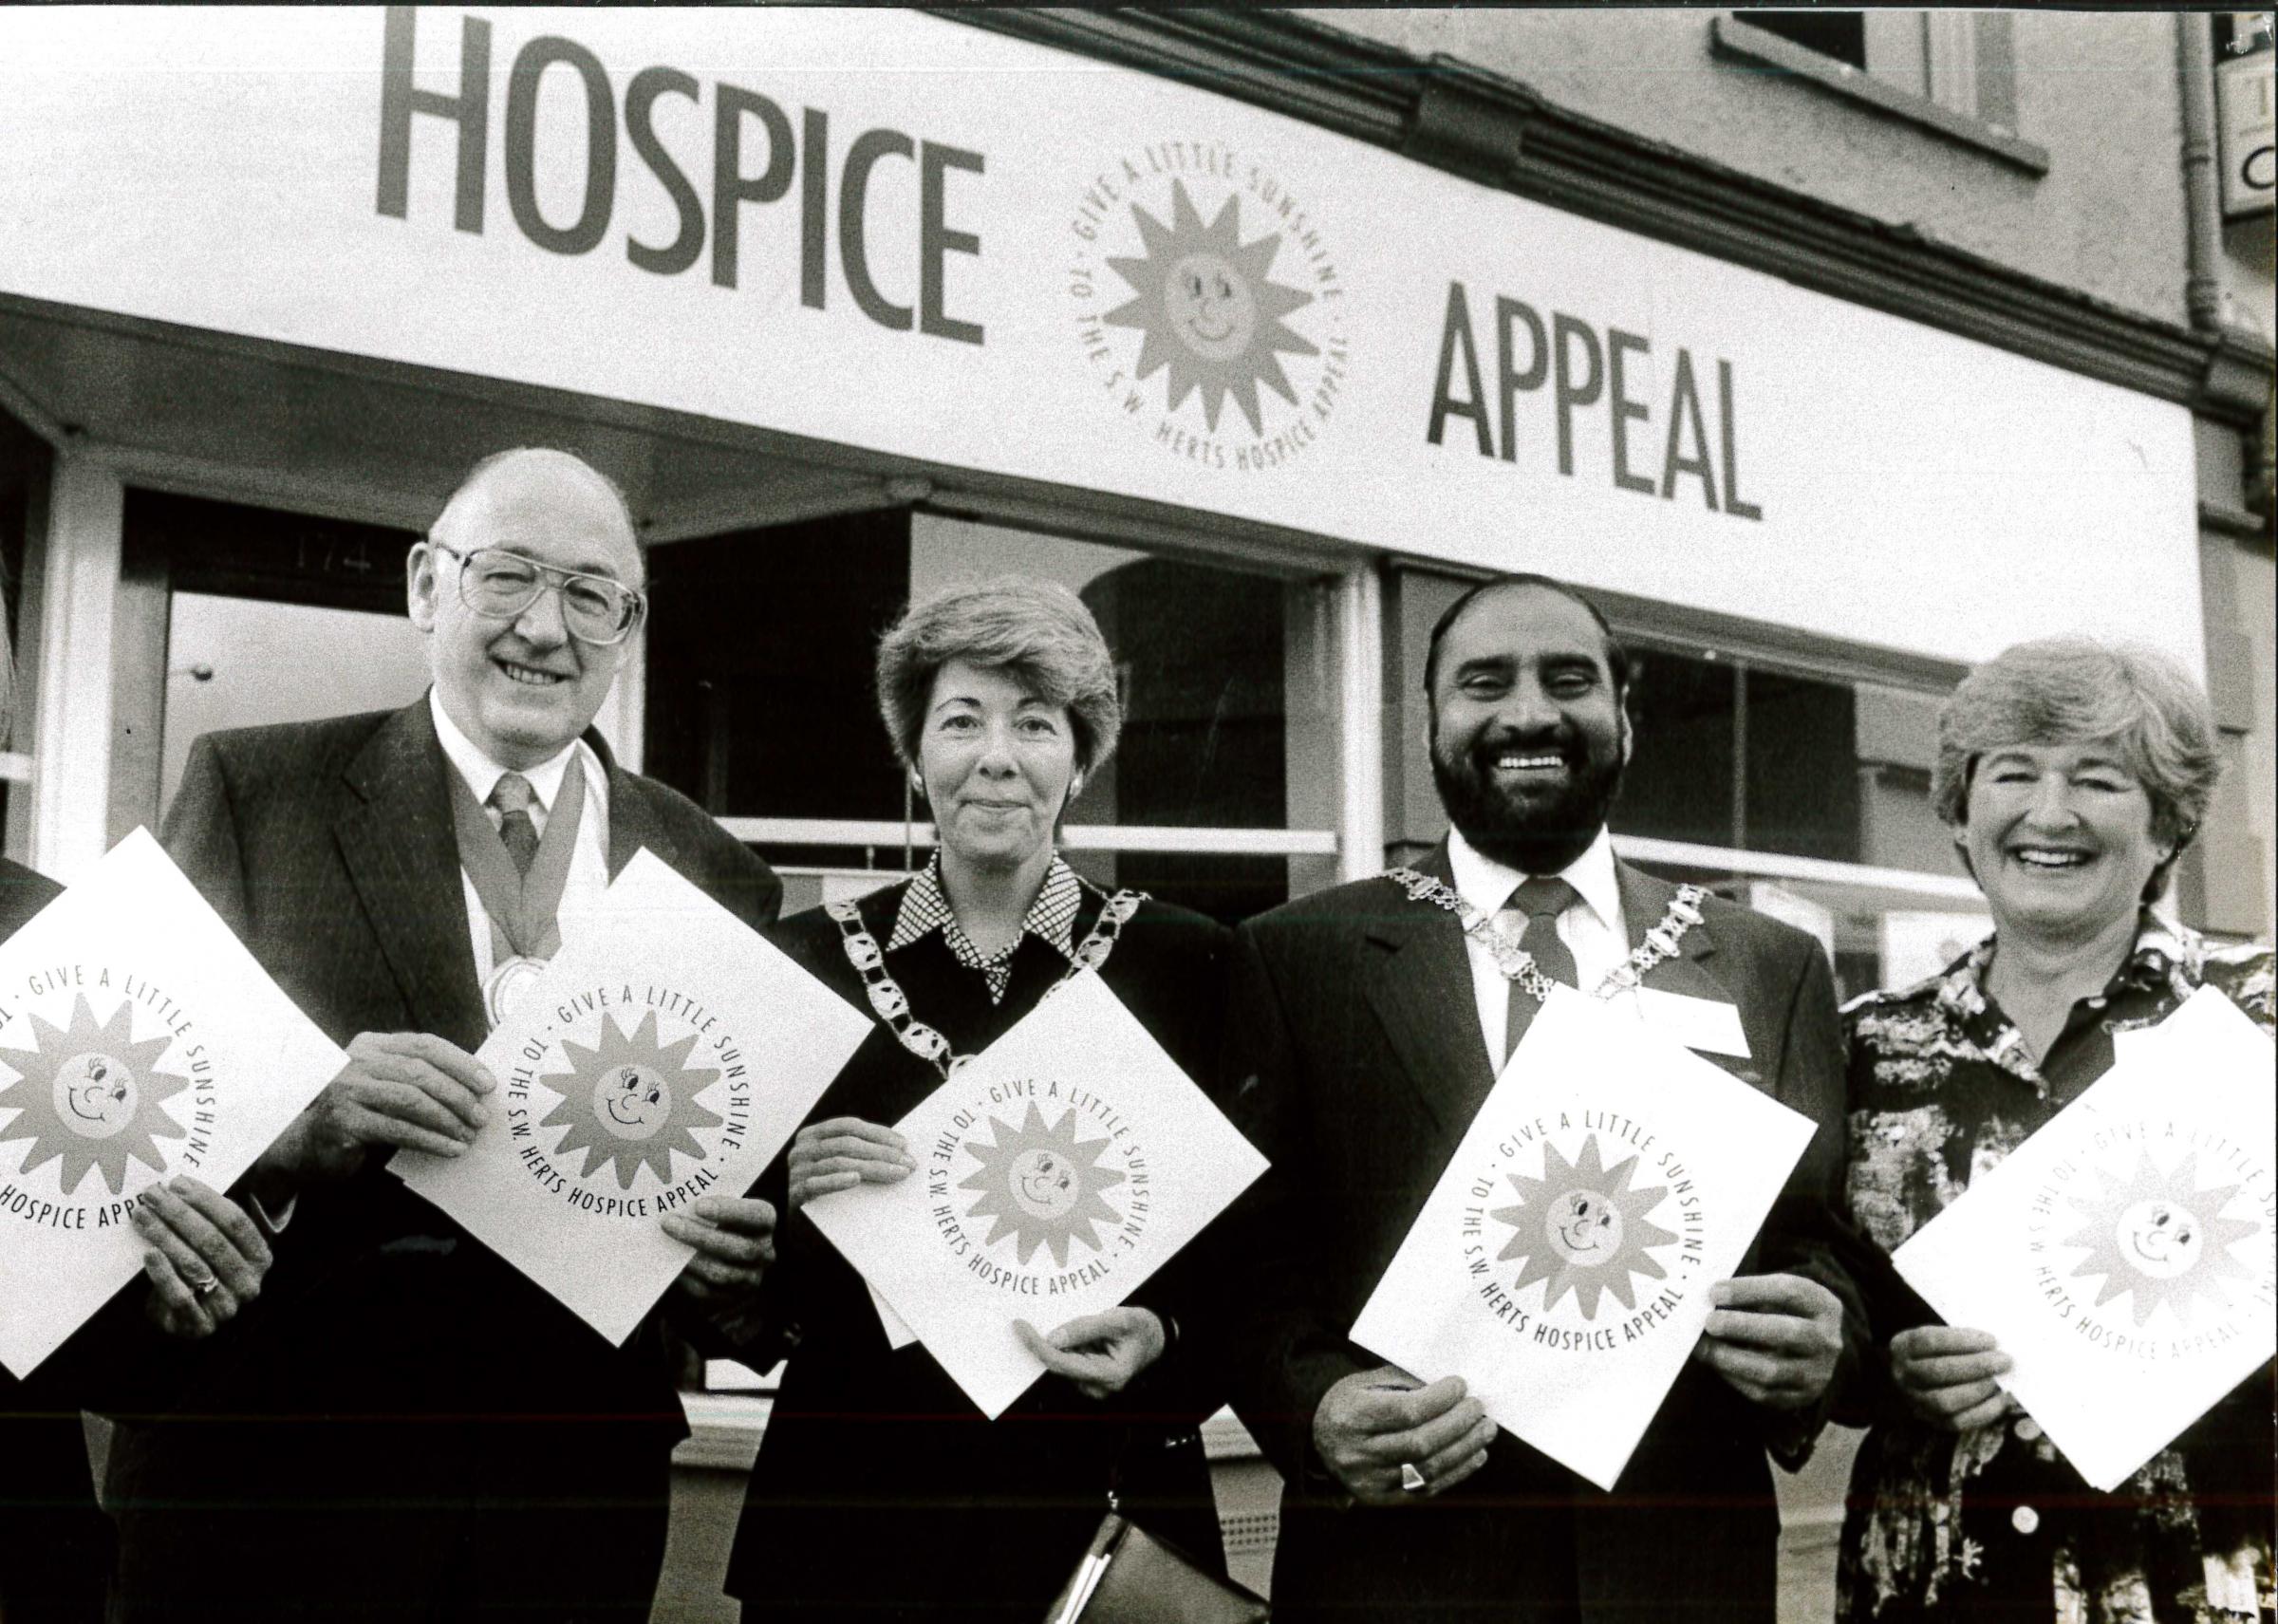 The first Hospice Shop - with the appeal office on the first floor - at 174 High Street